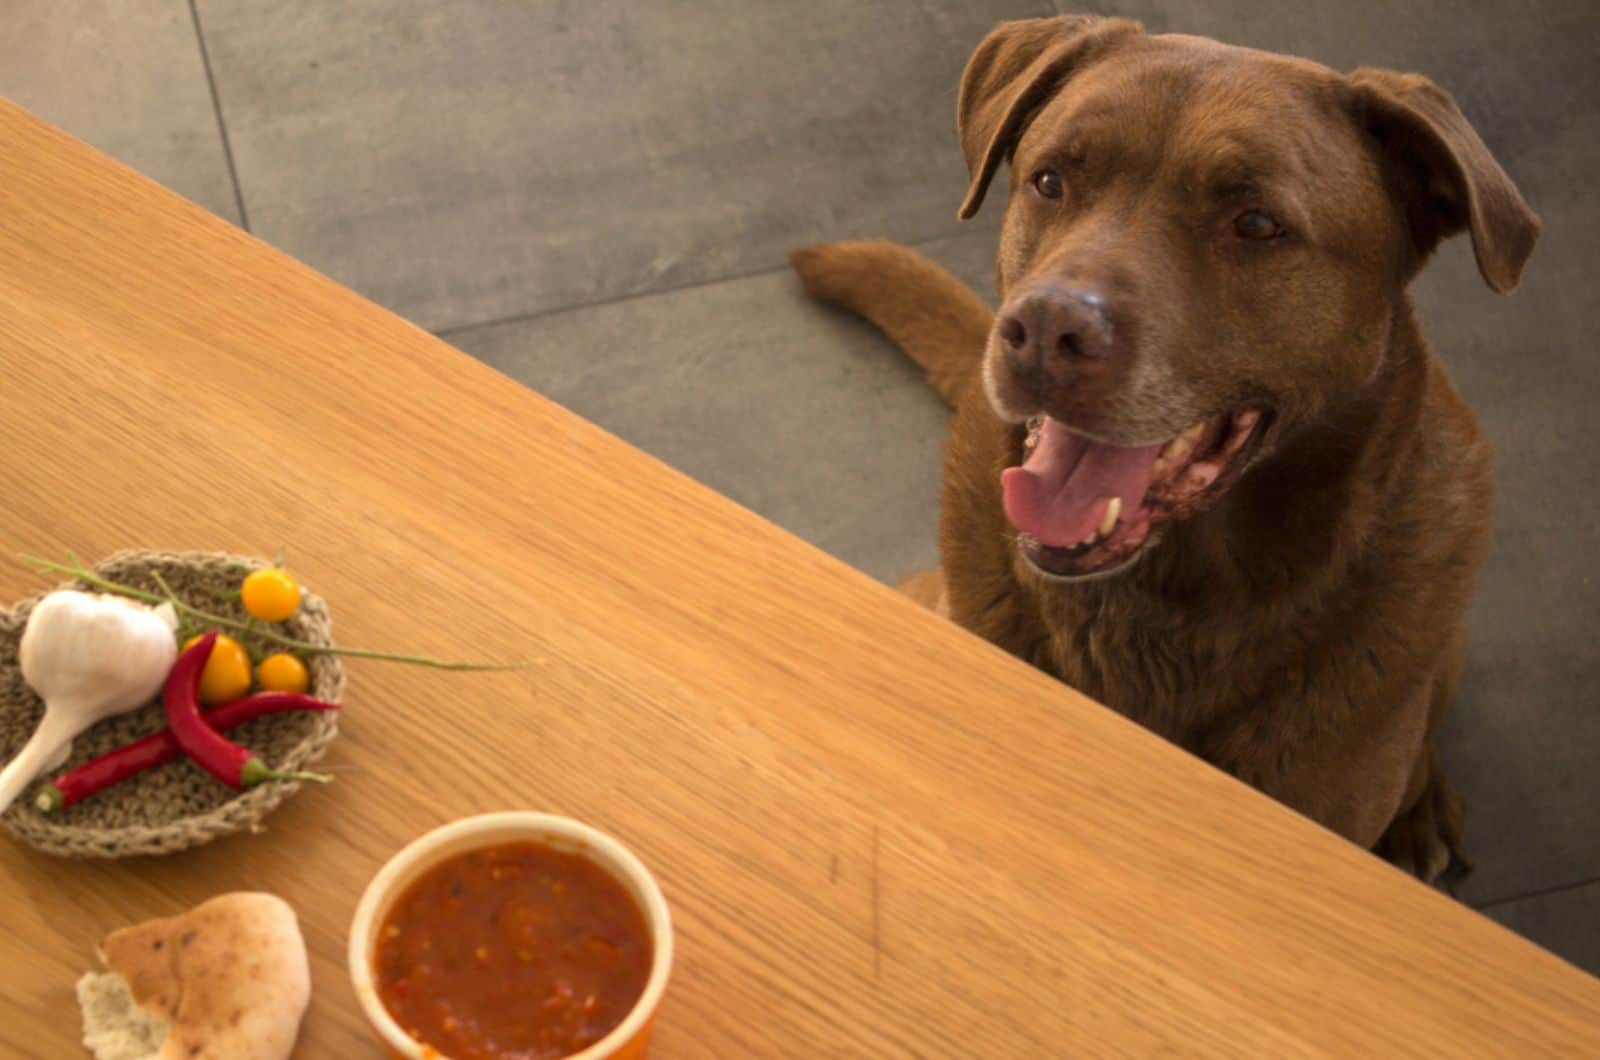 labrador dog looking at food on the table